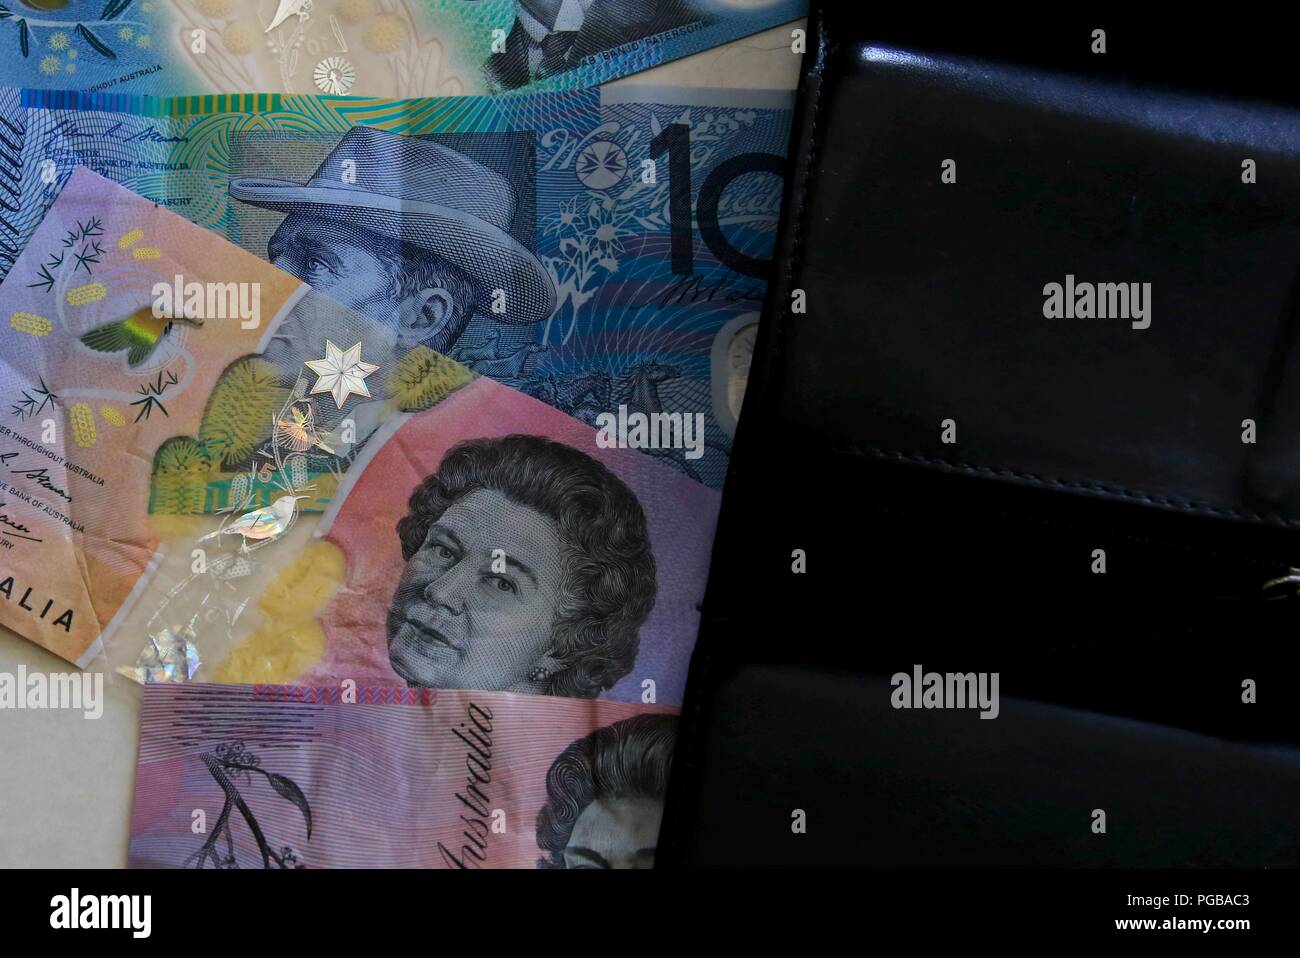 New and old Australian currency notes Stock Photo